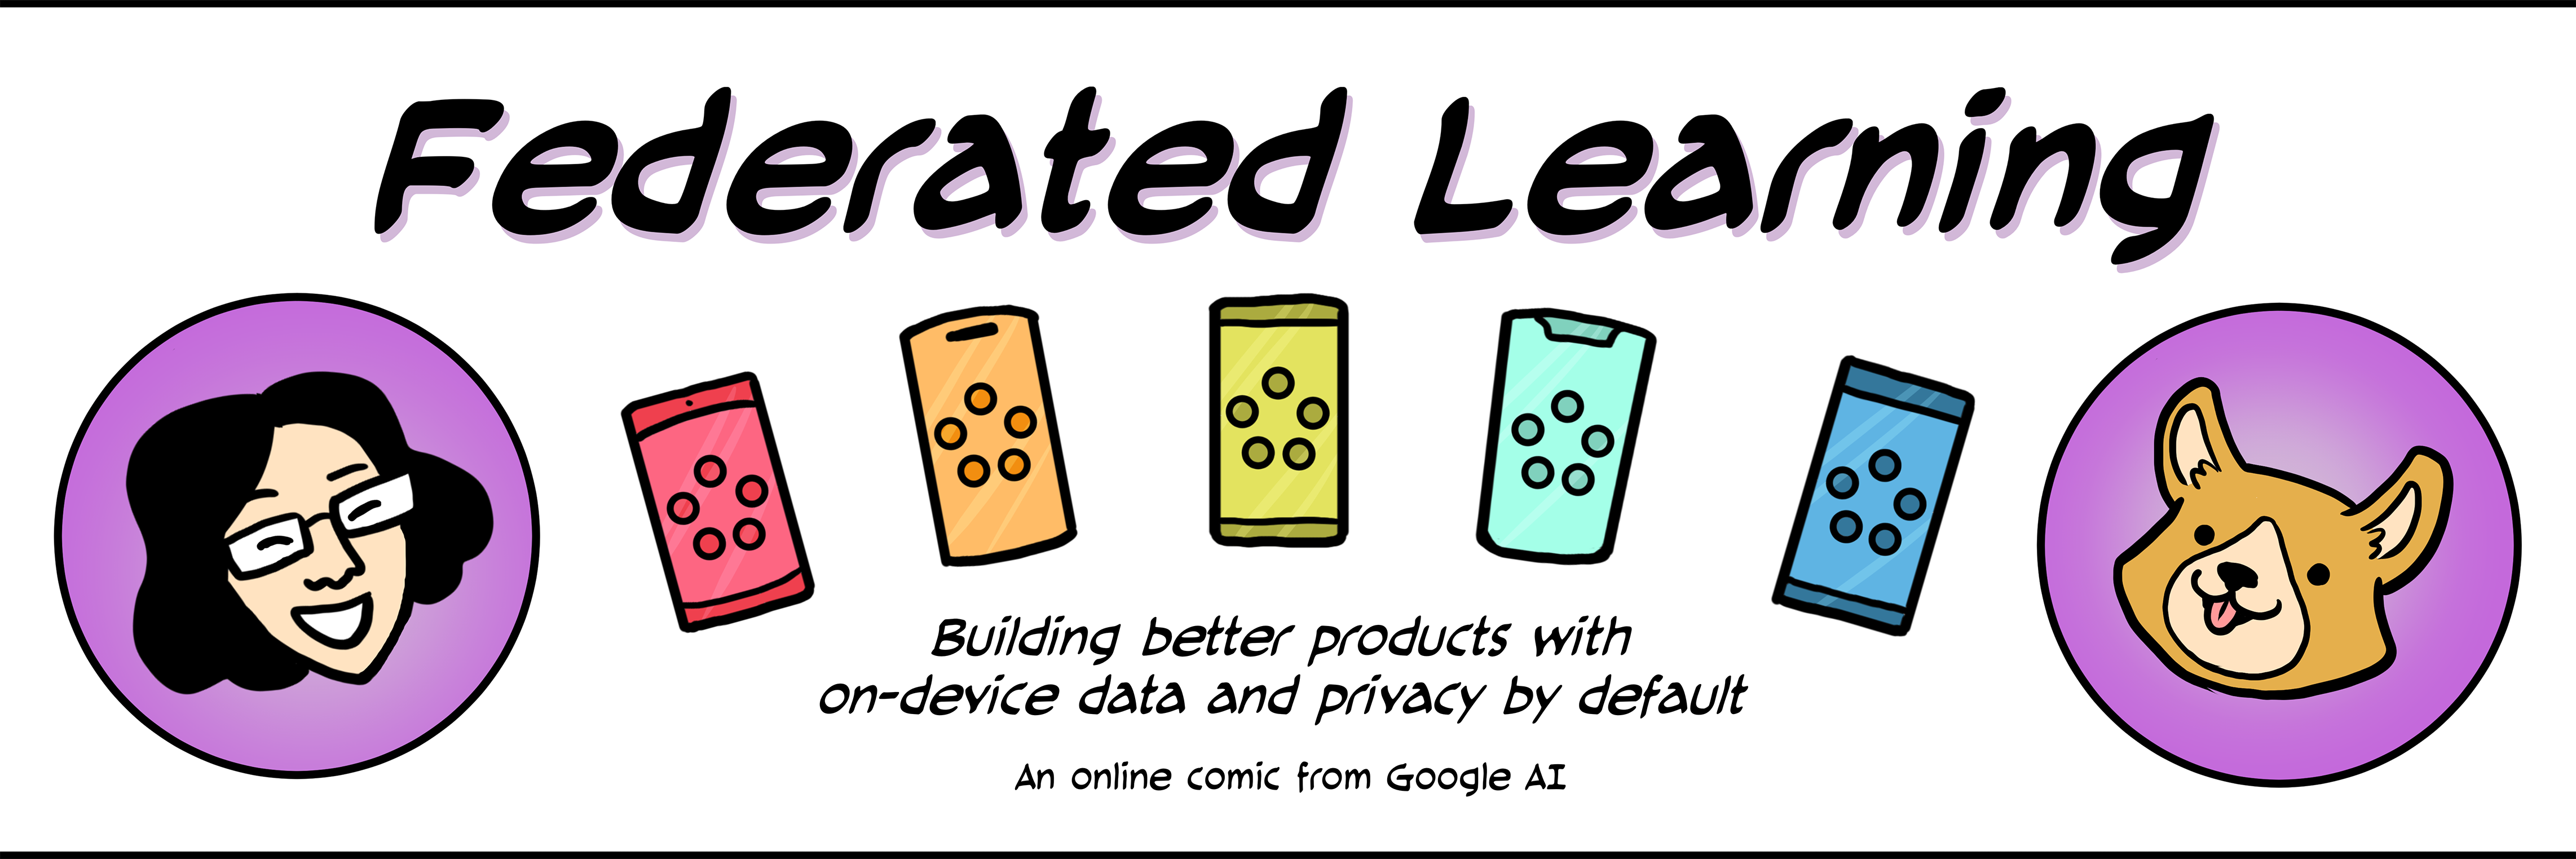 Federated Learning - An online comic from Google AI